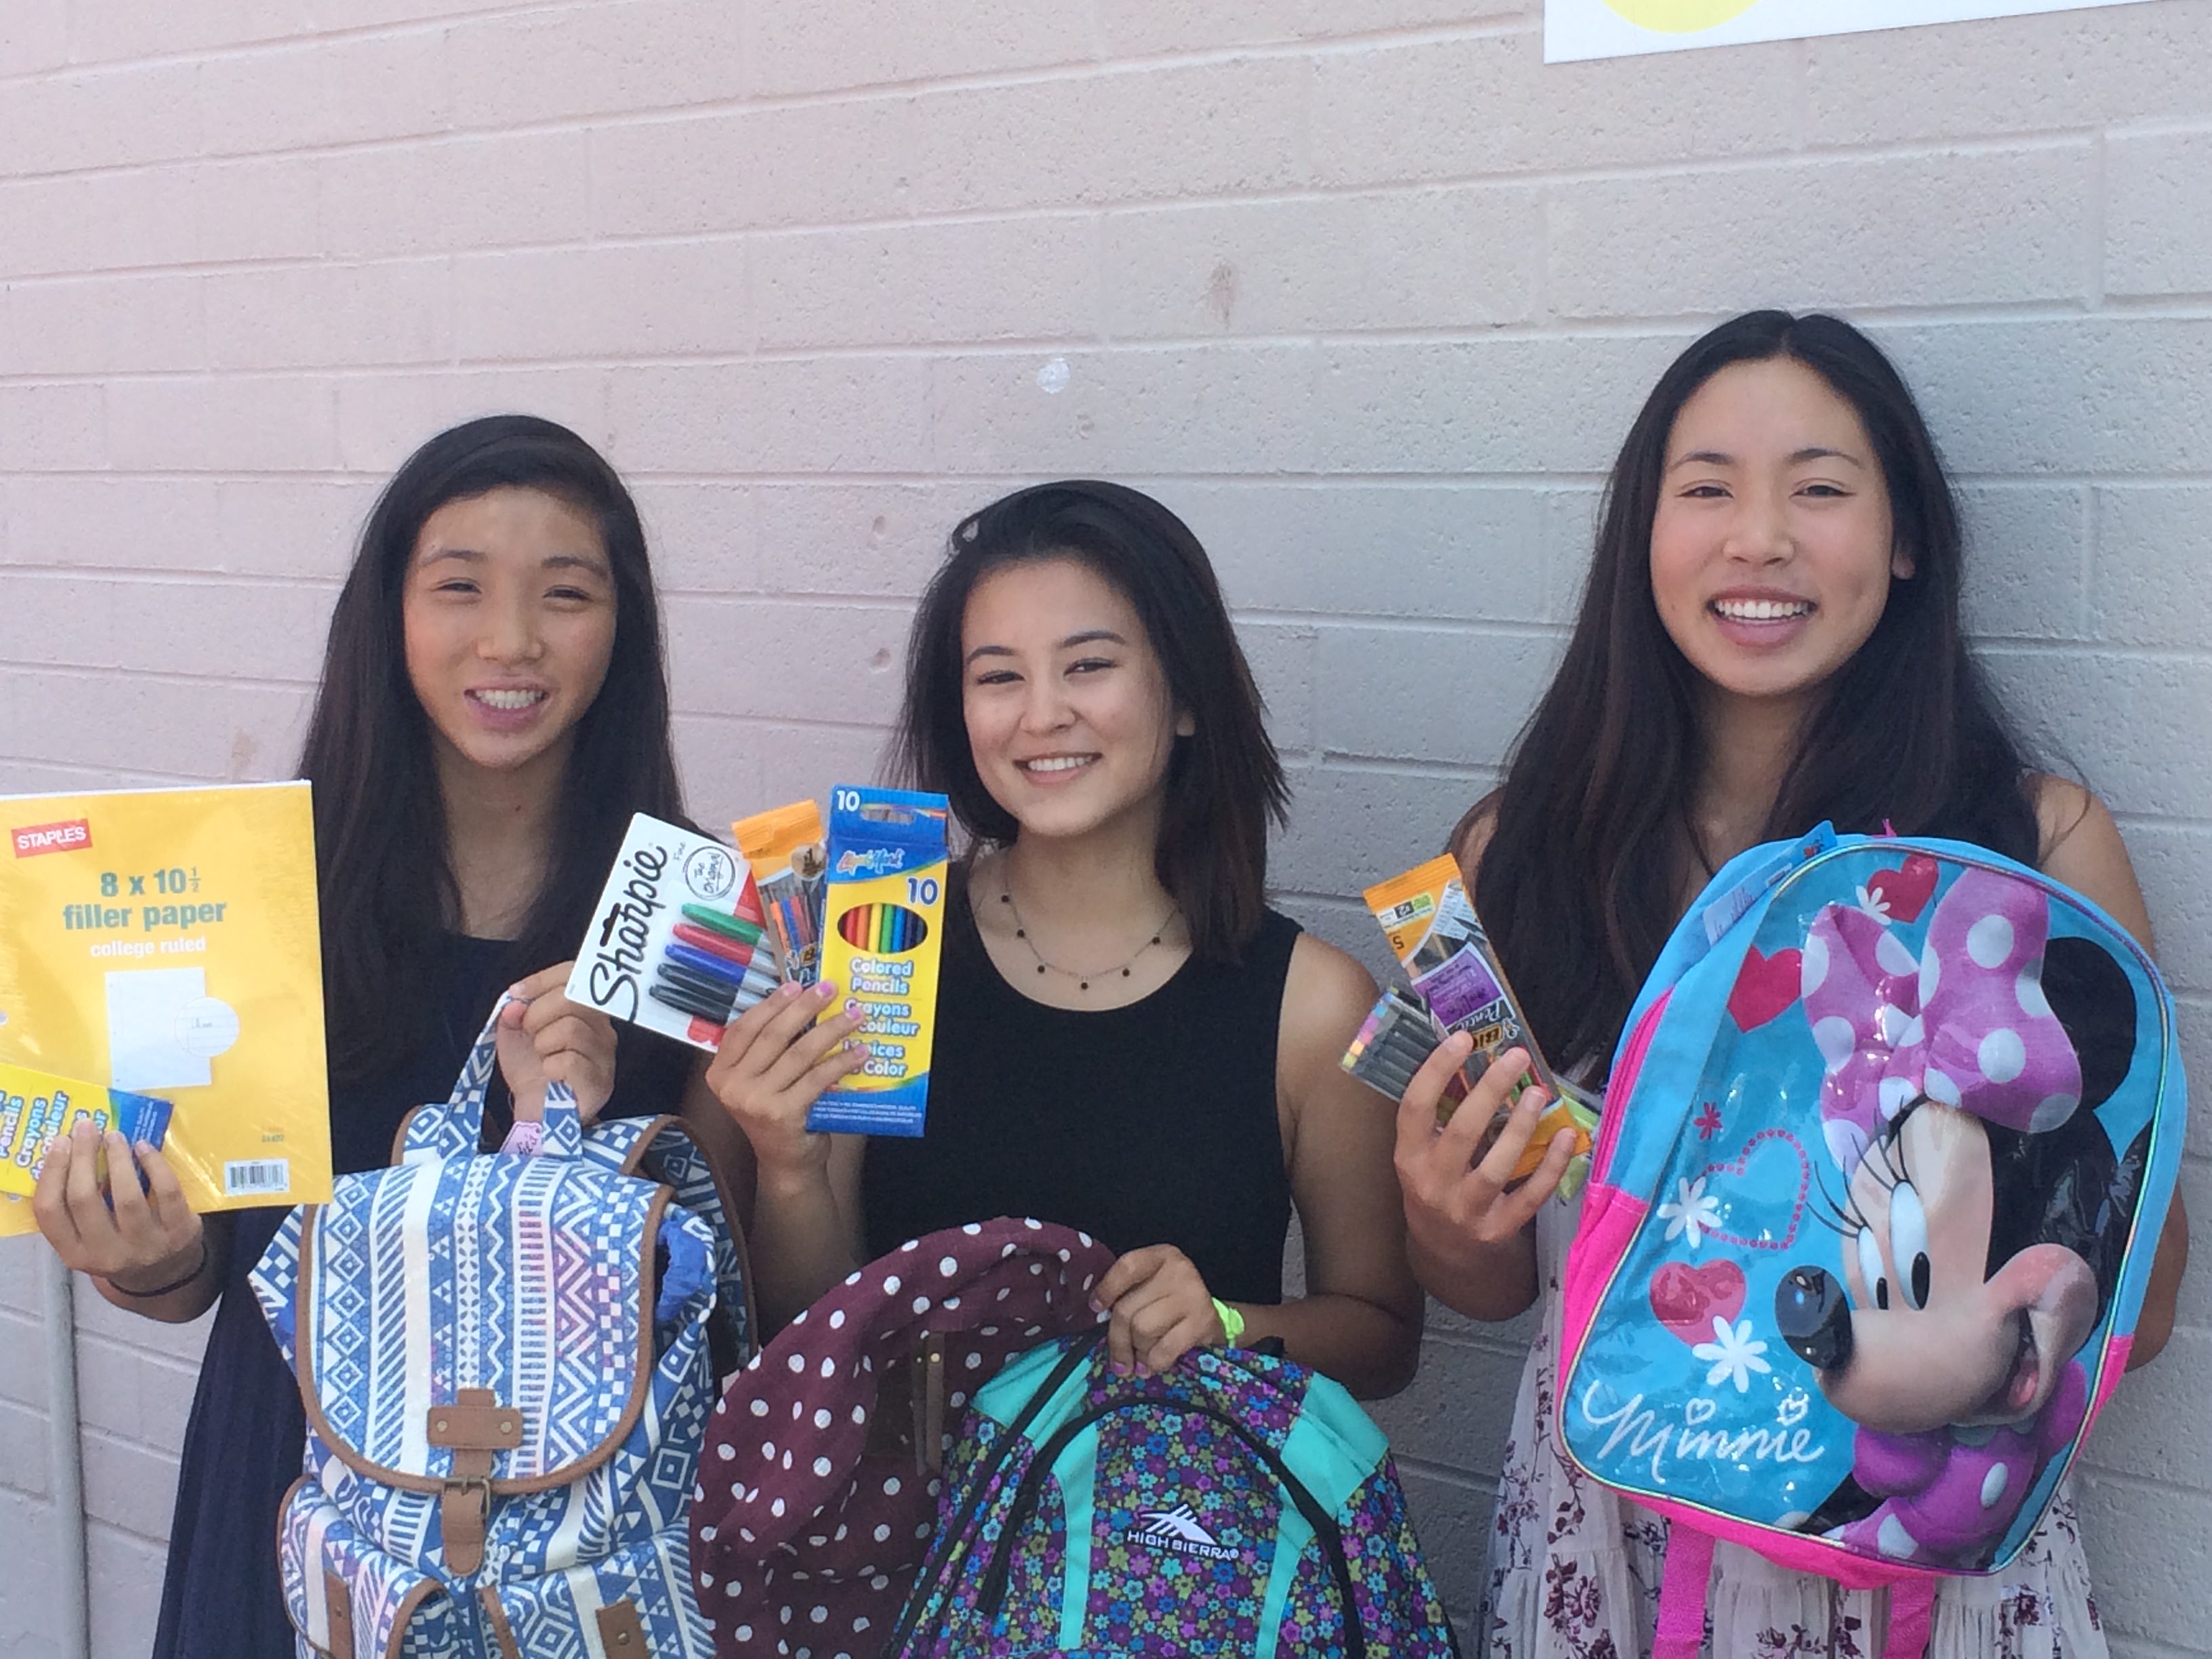 Students Donate School Supplies with Lemonade Stand Profits